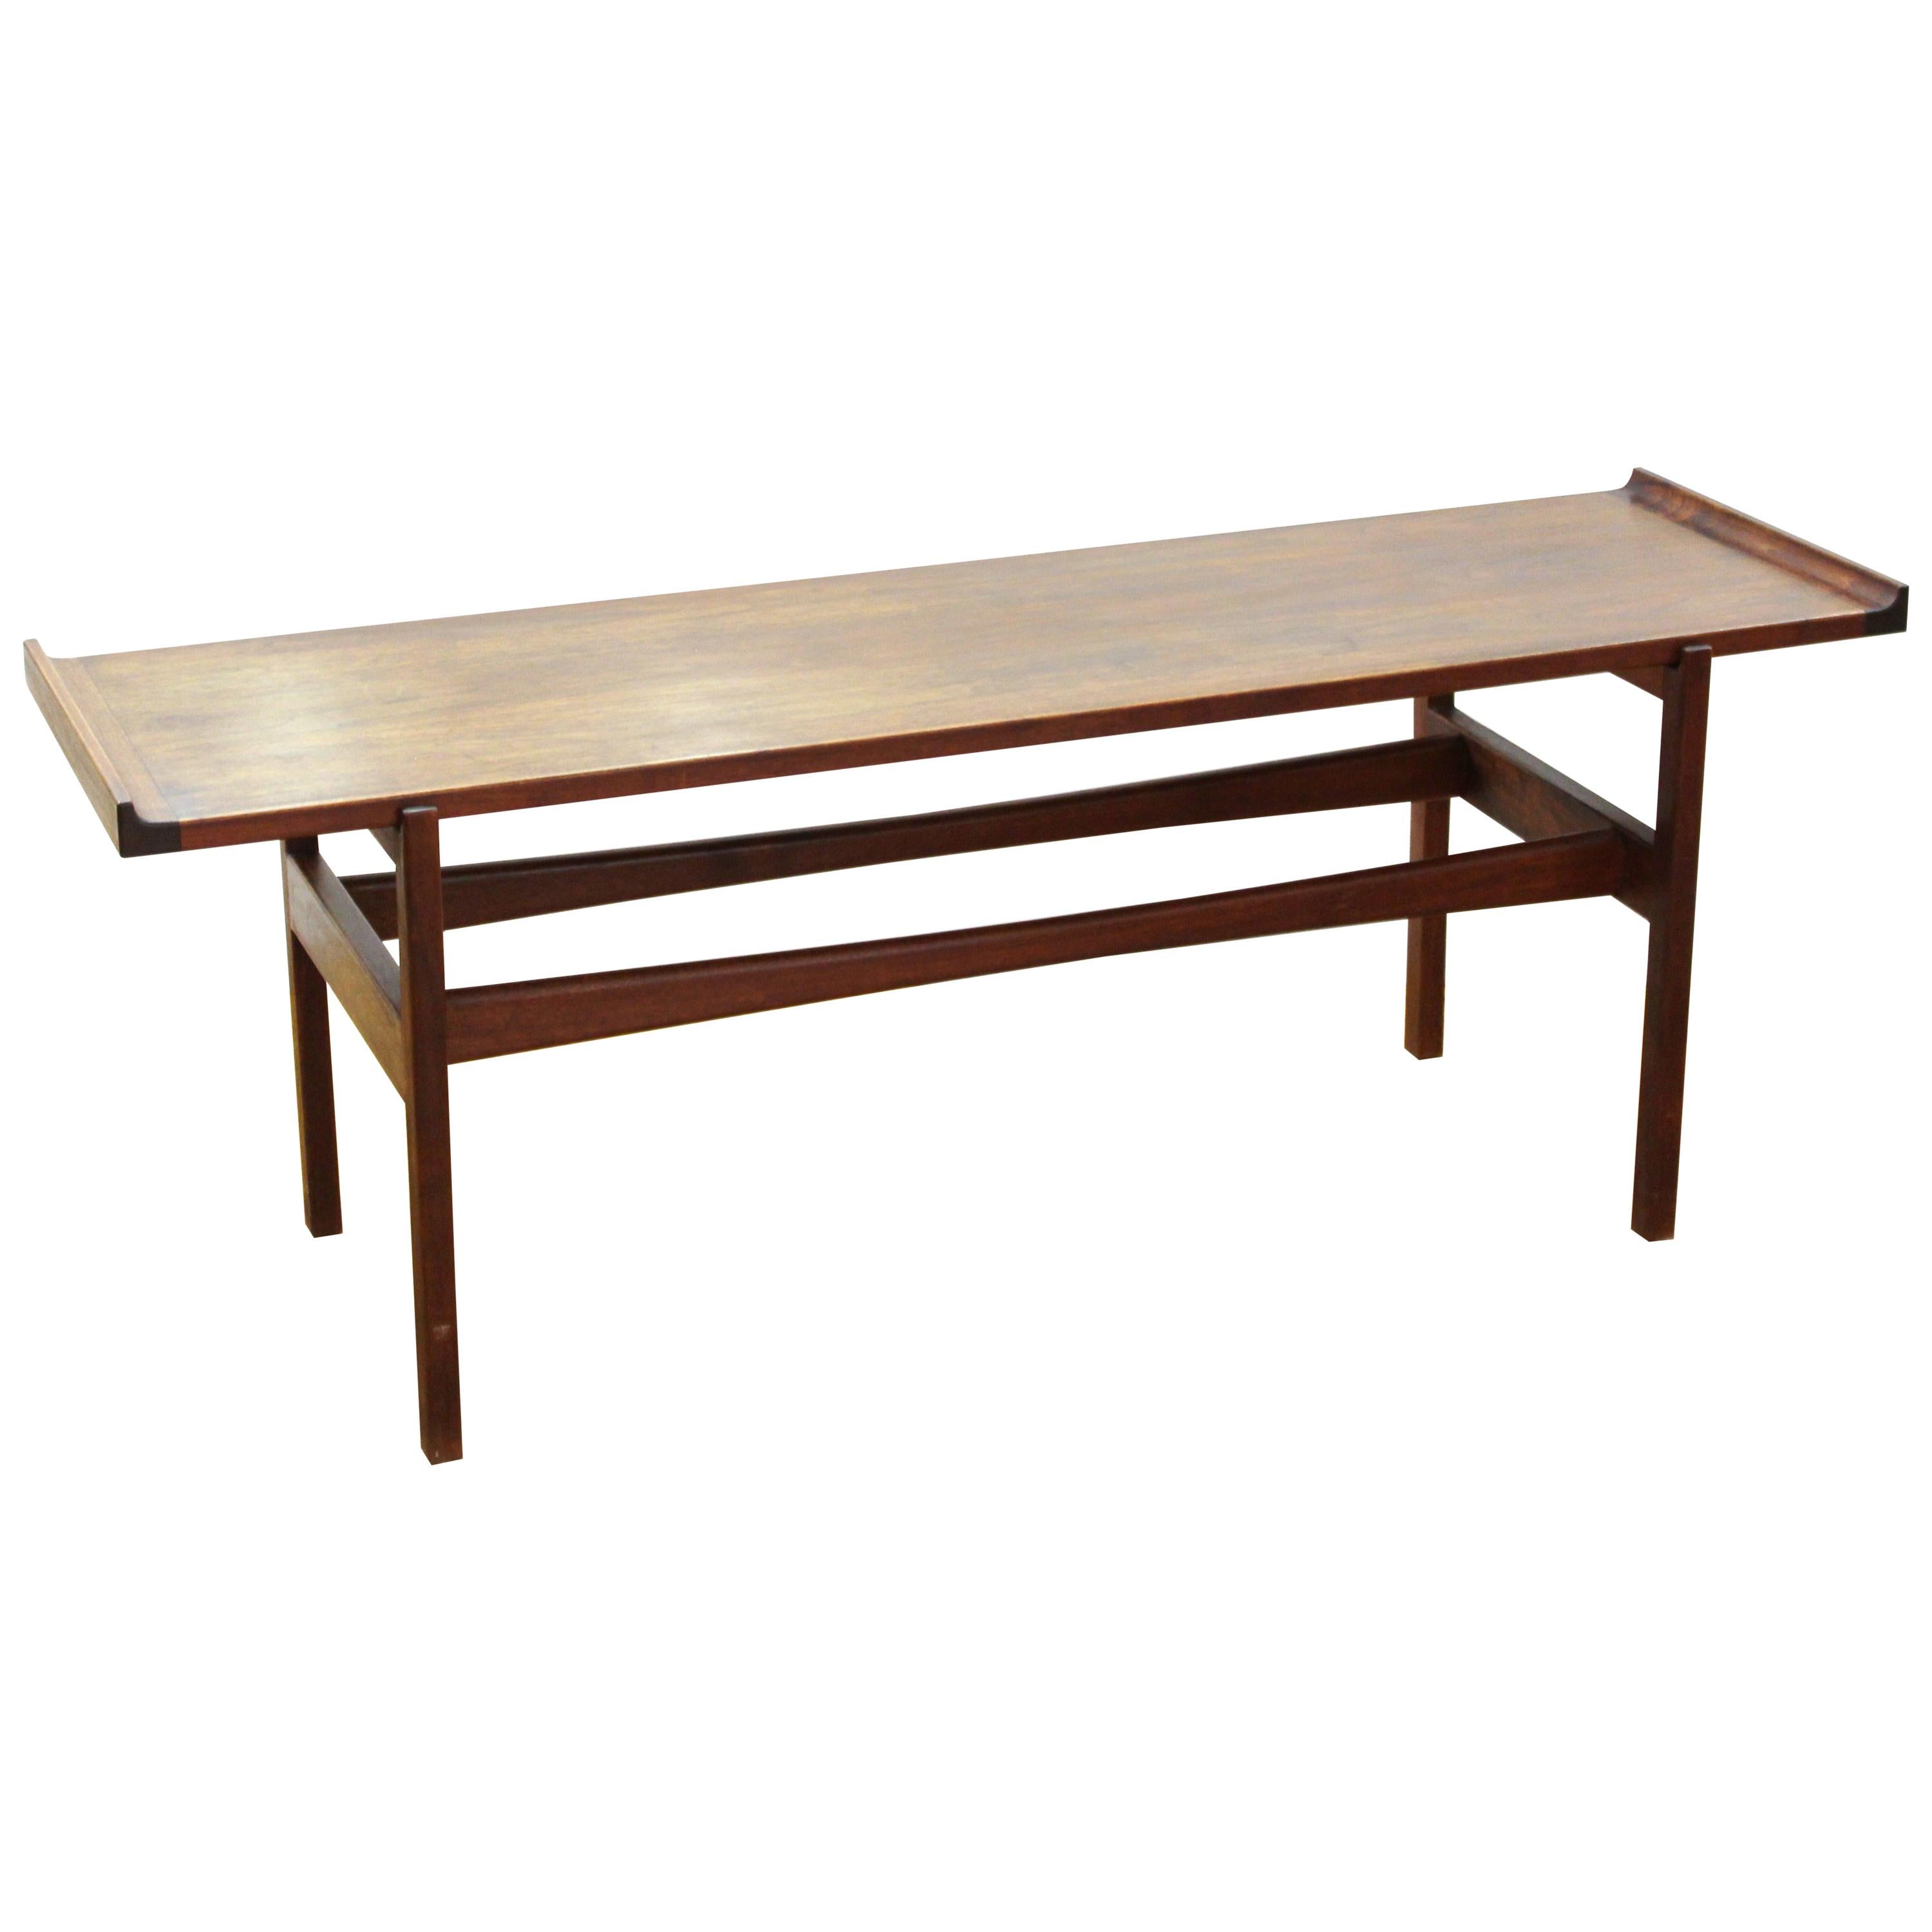 Jens Risom Mid-Century Modern Coffee Table or Low Bench